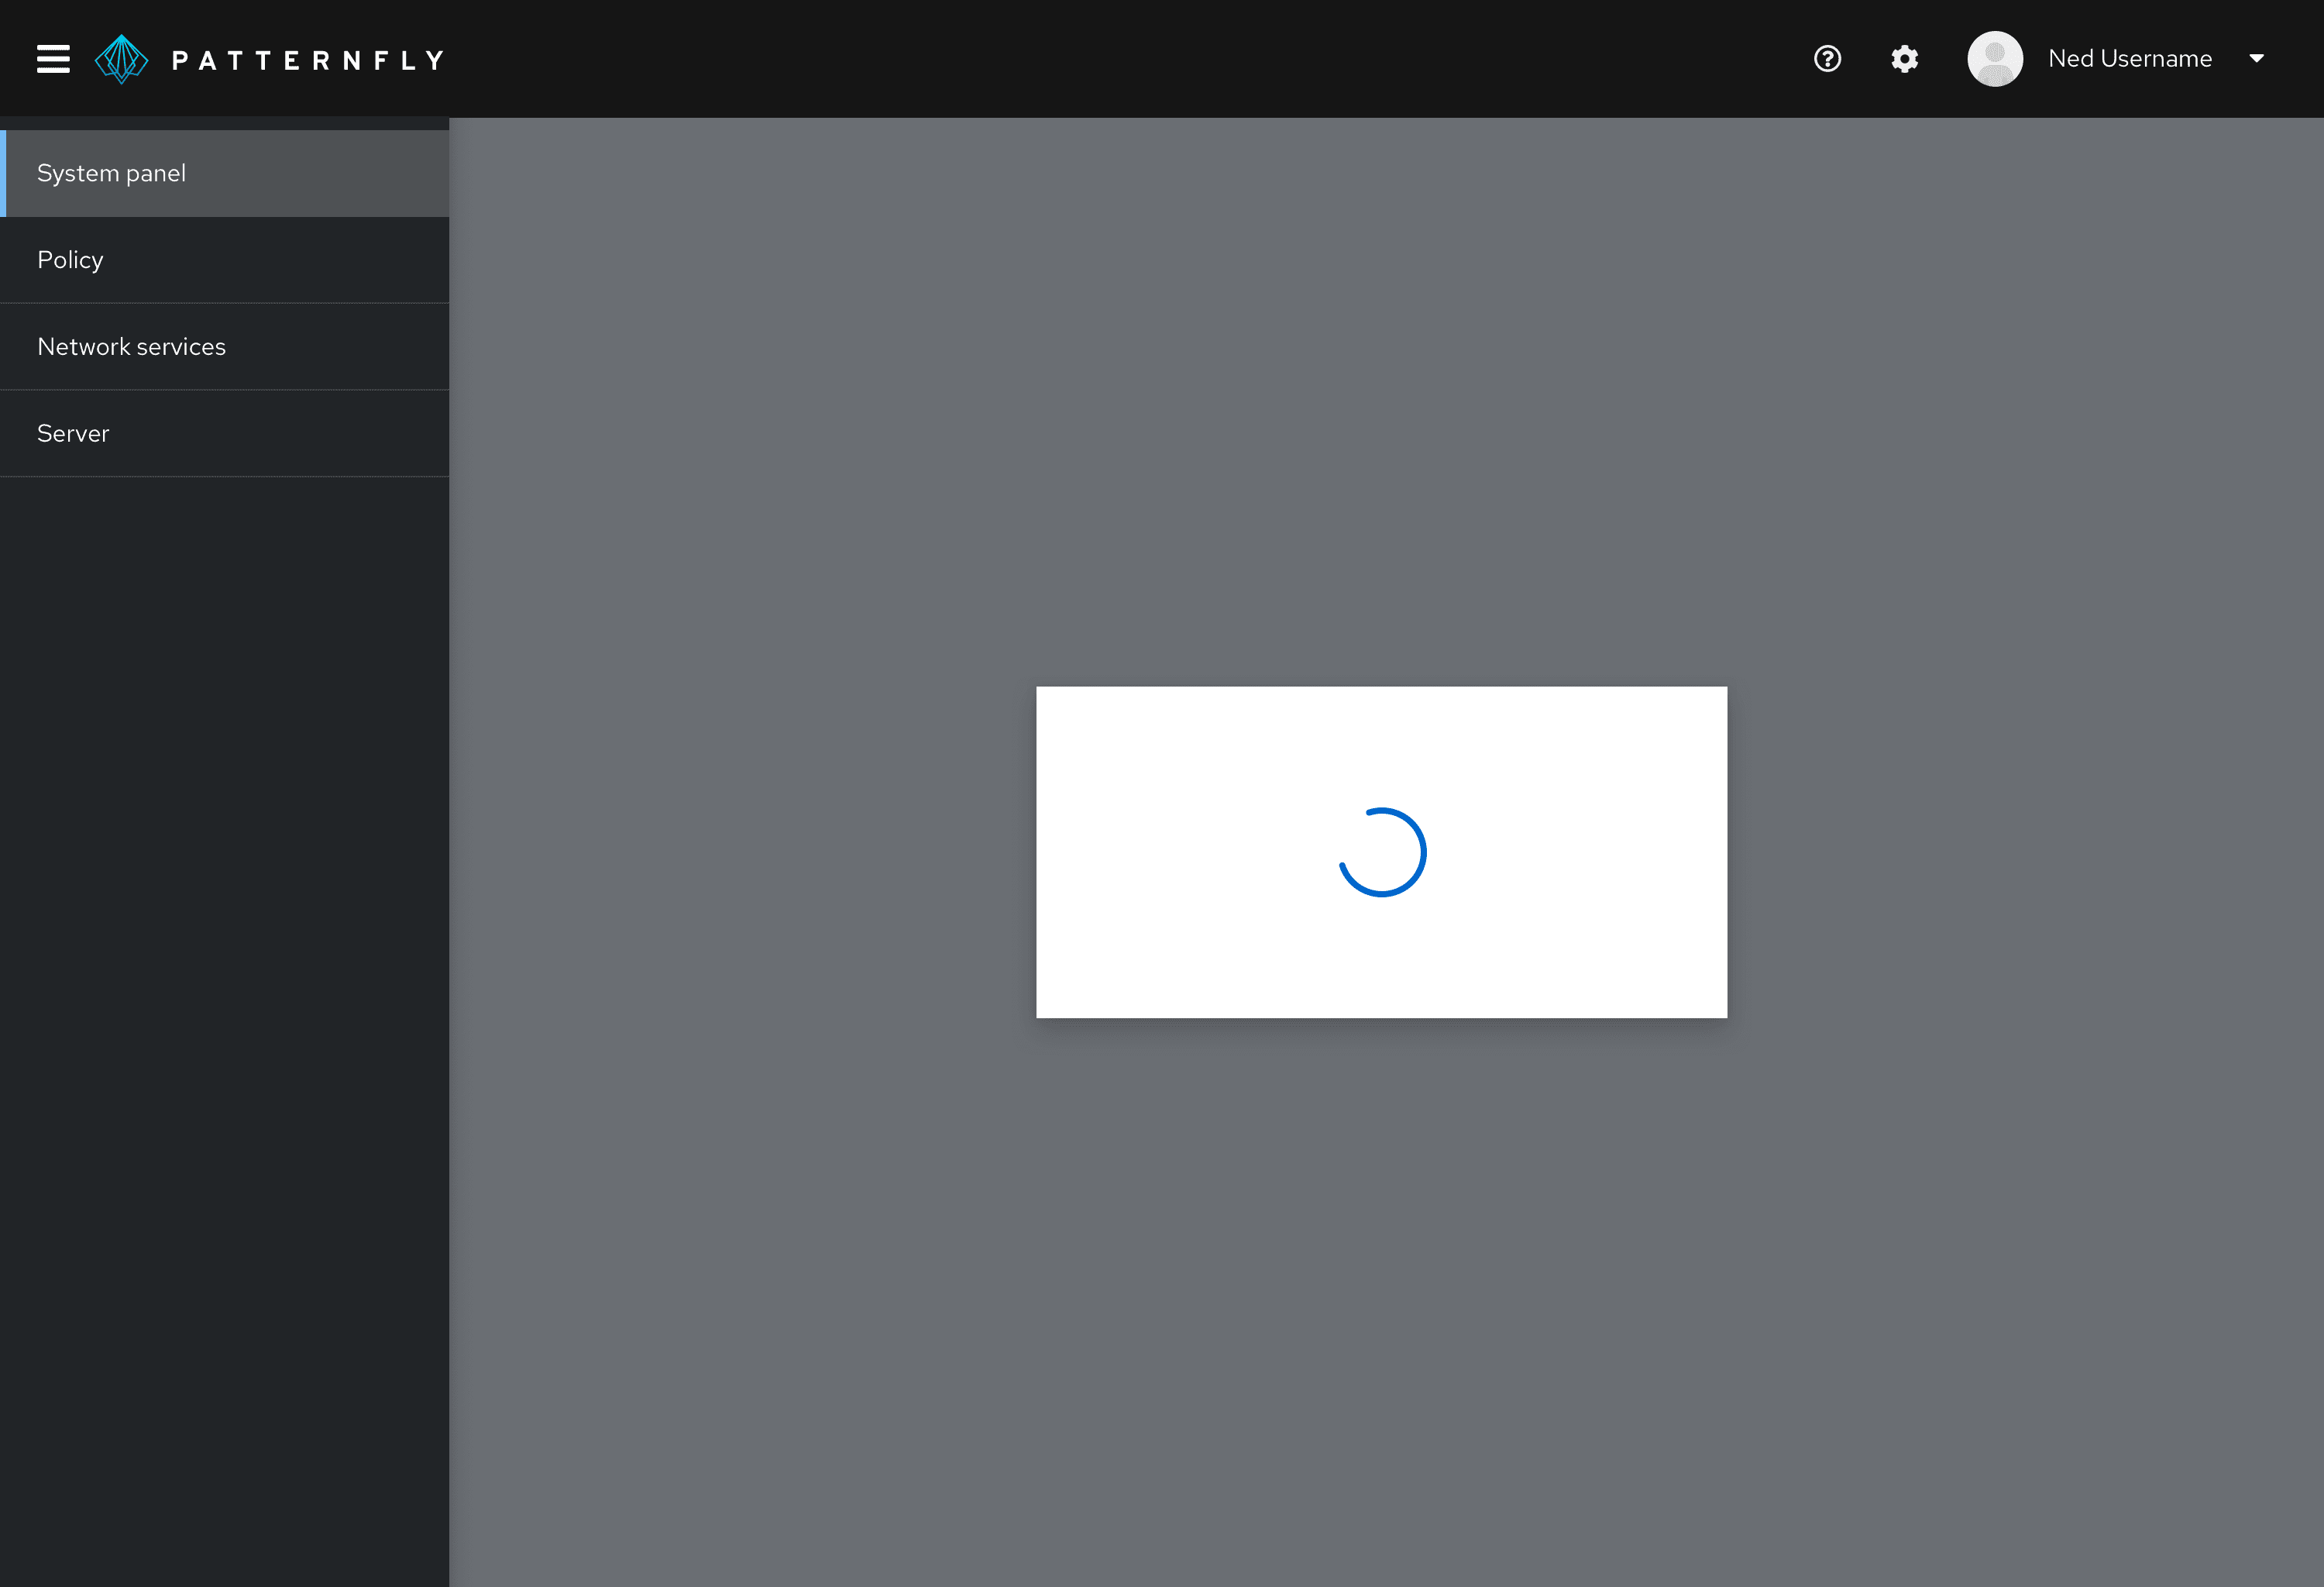 Example of spinner in a modal window